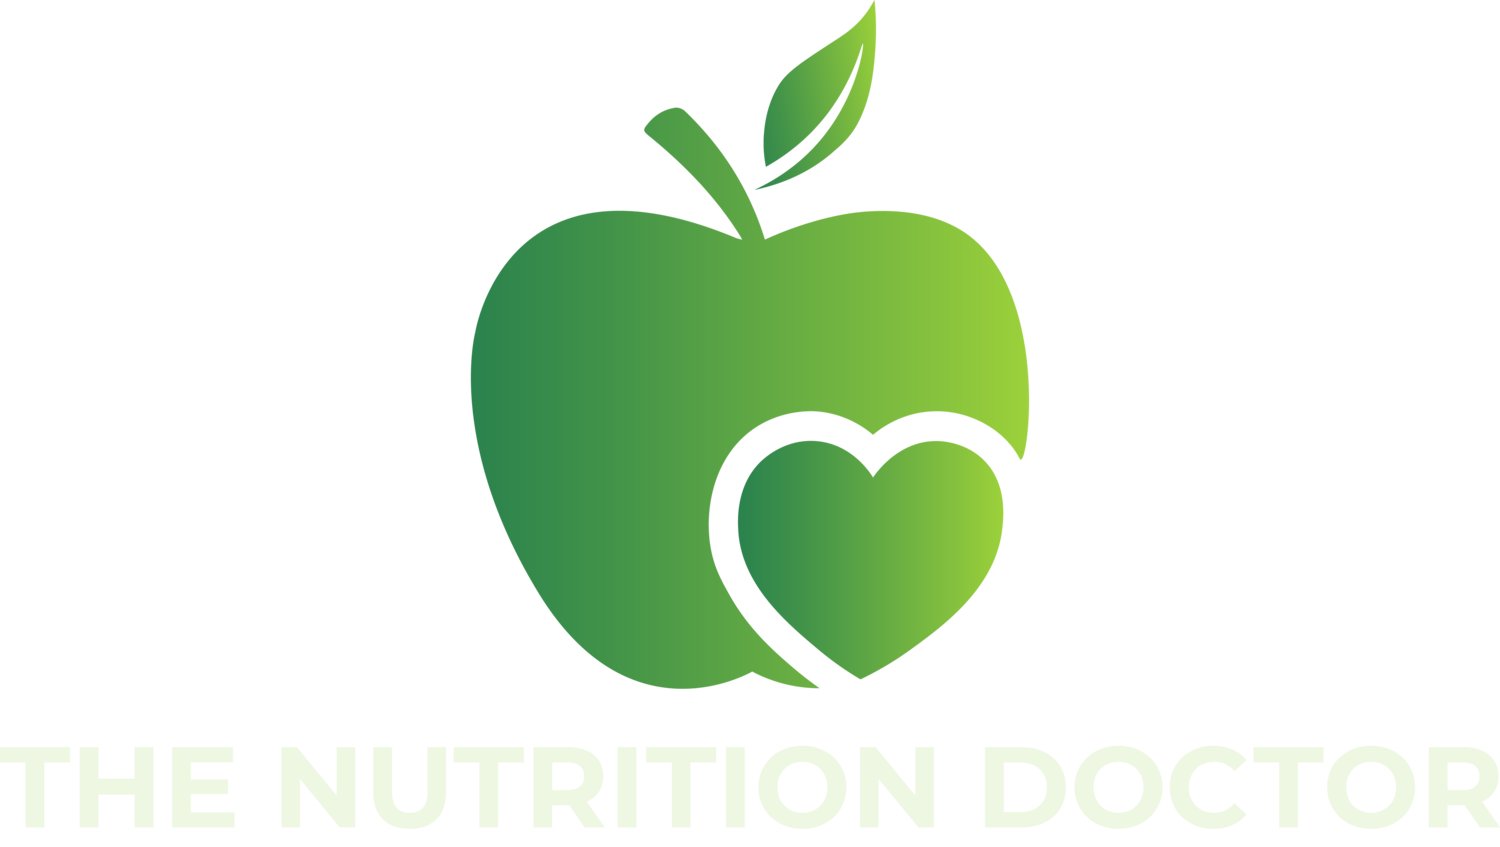 The Nutrition Doctor